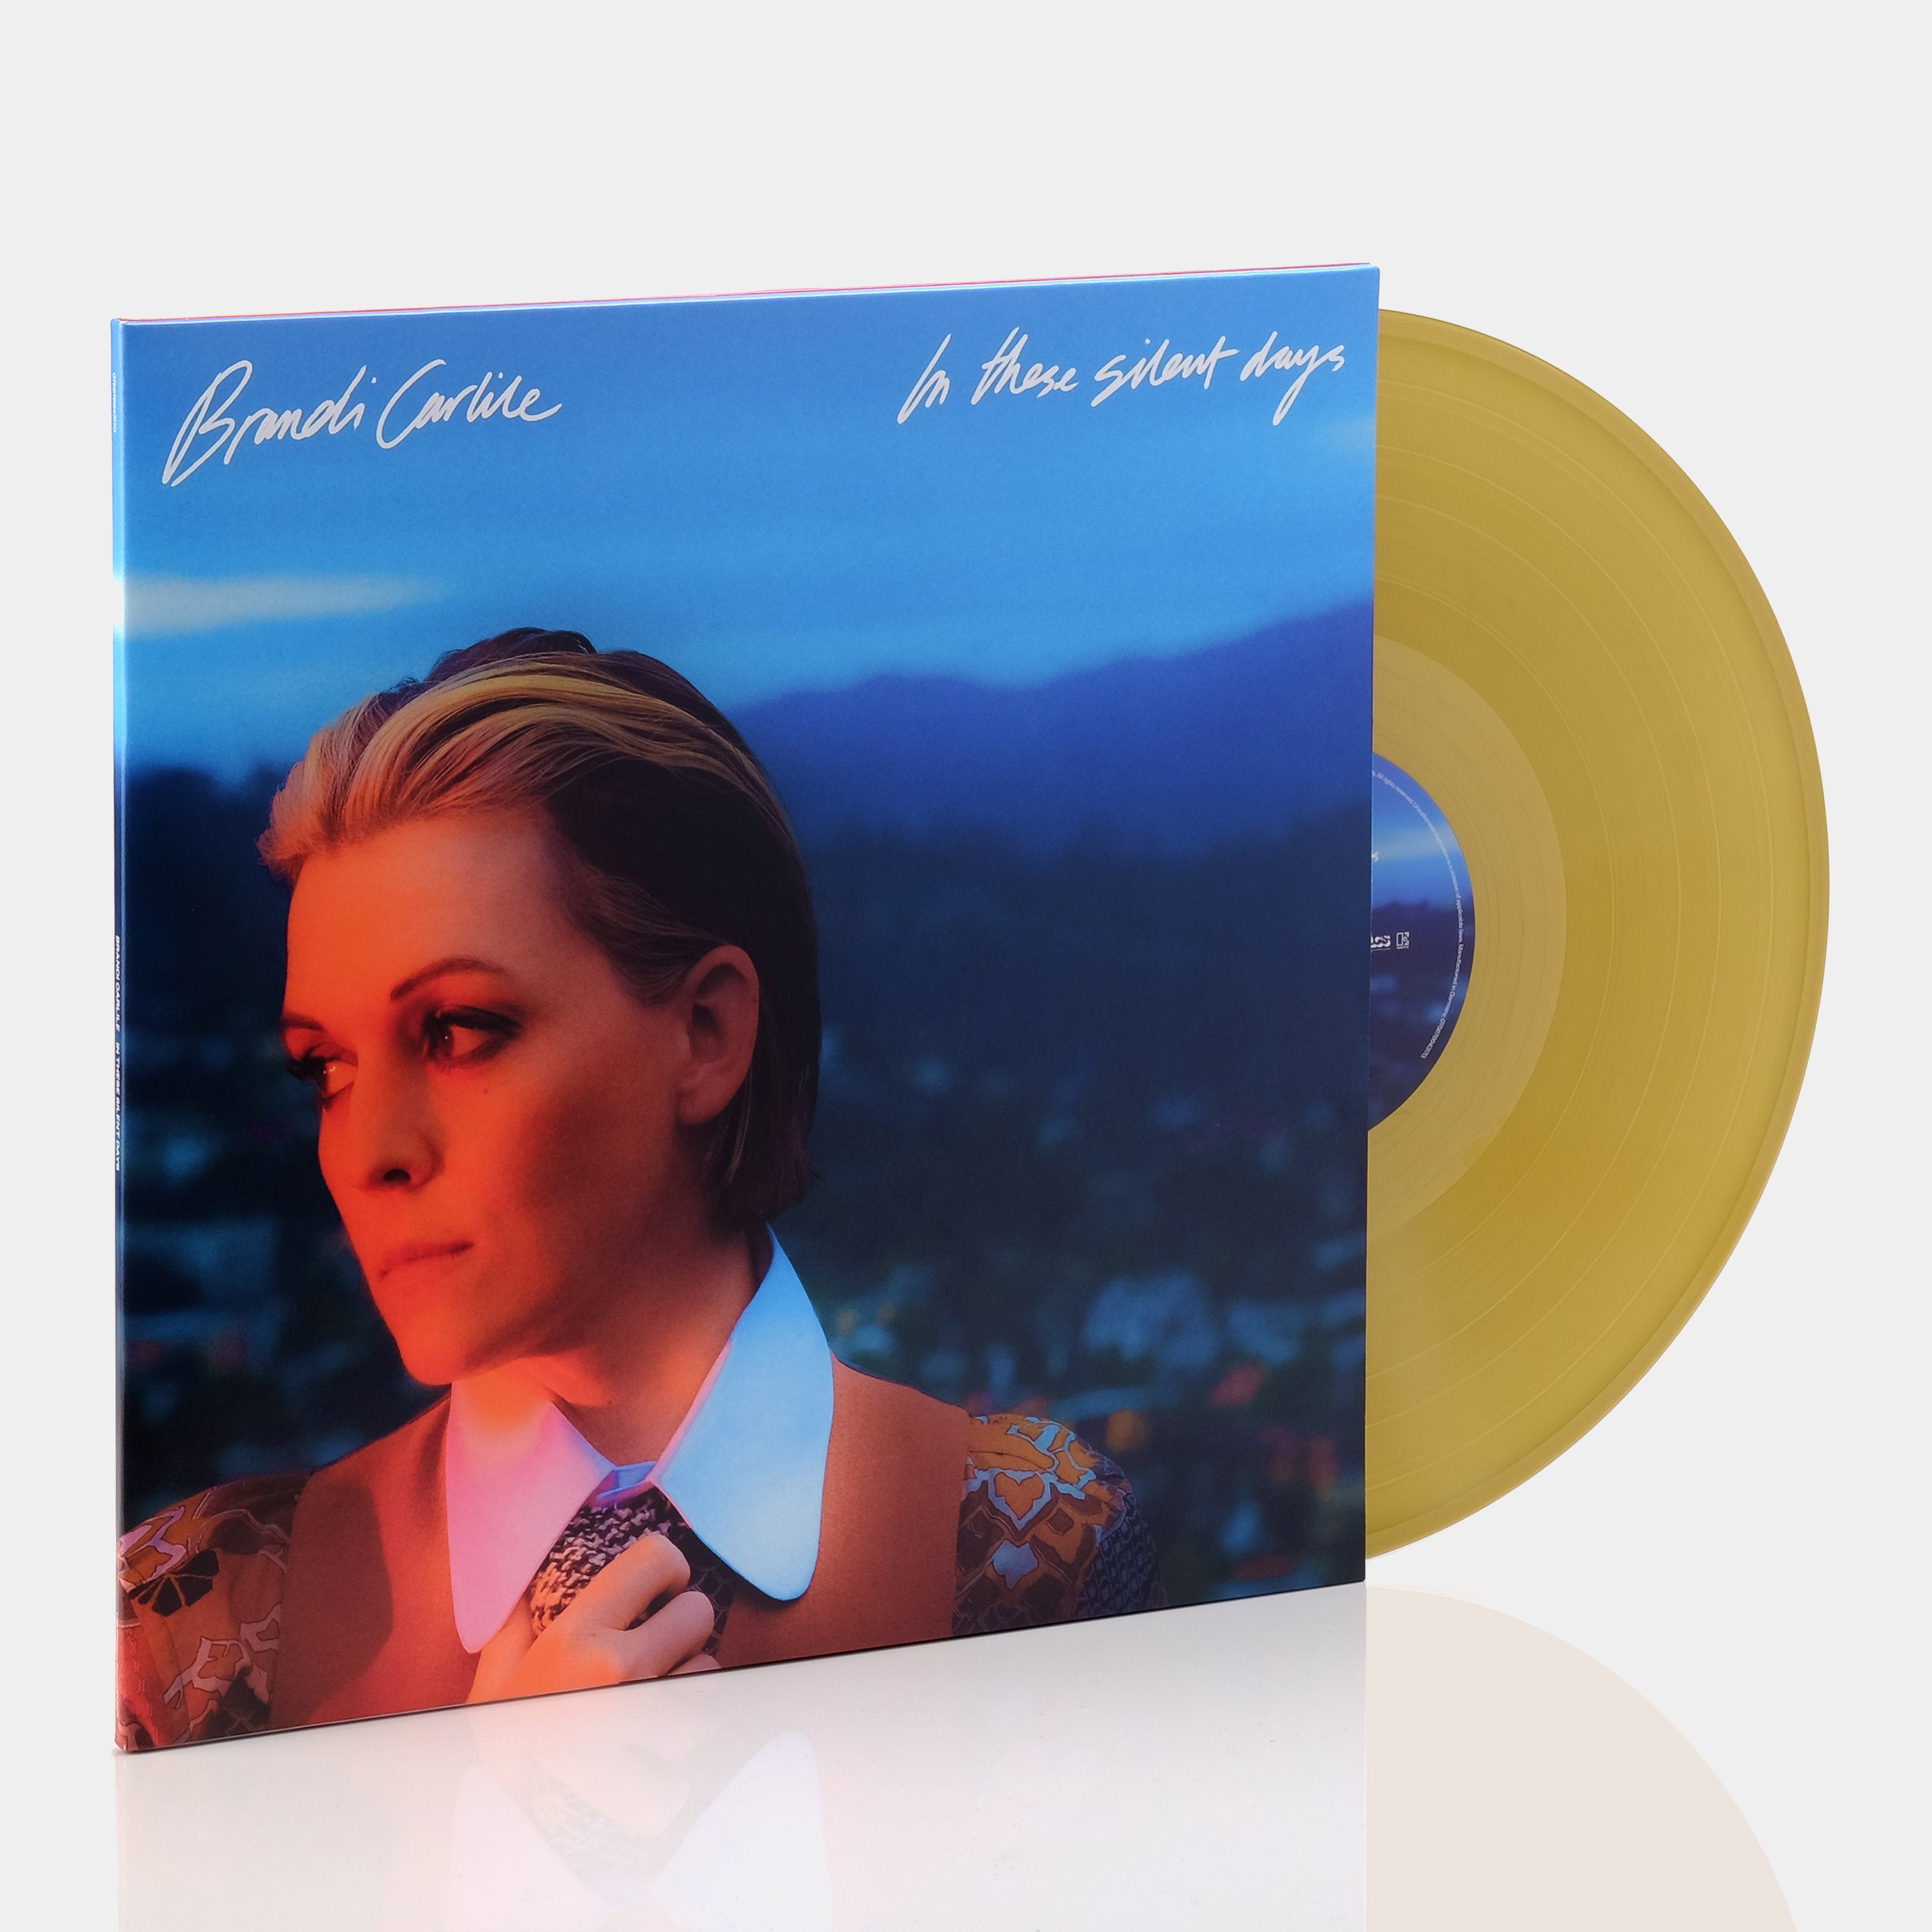 Brandi Carlile - In These Silent Days (Indie Exclusive) LP Gold Vinyl Record